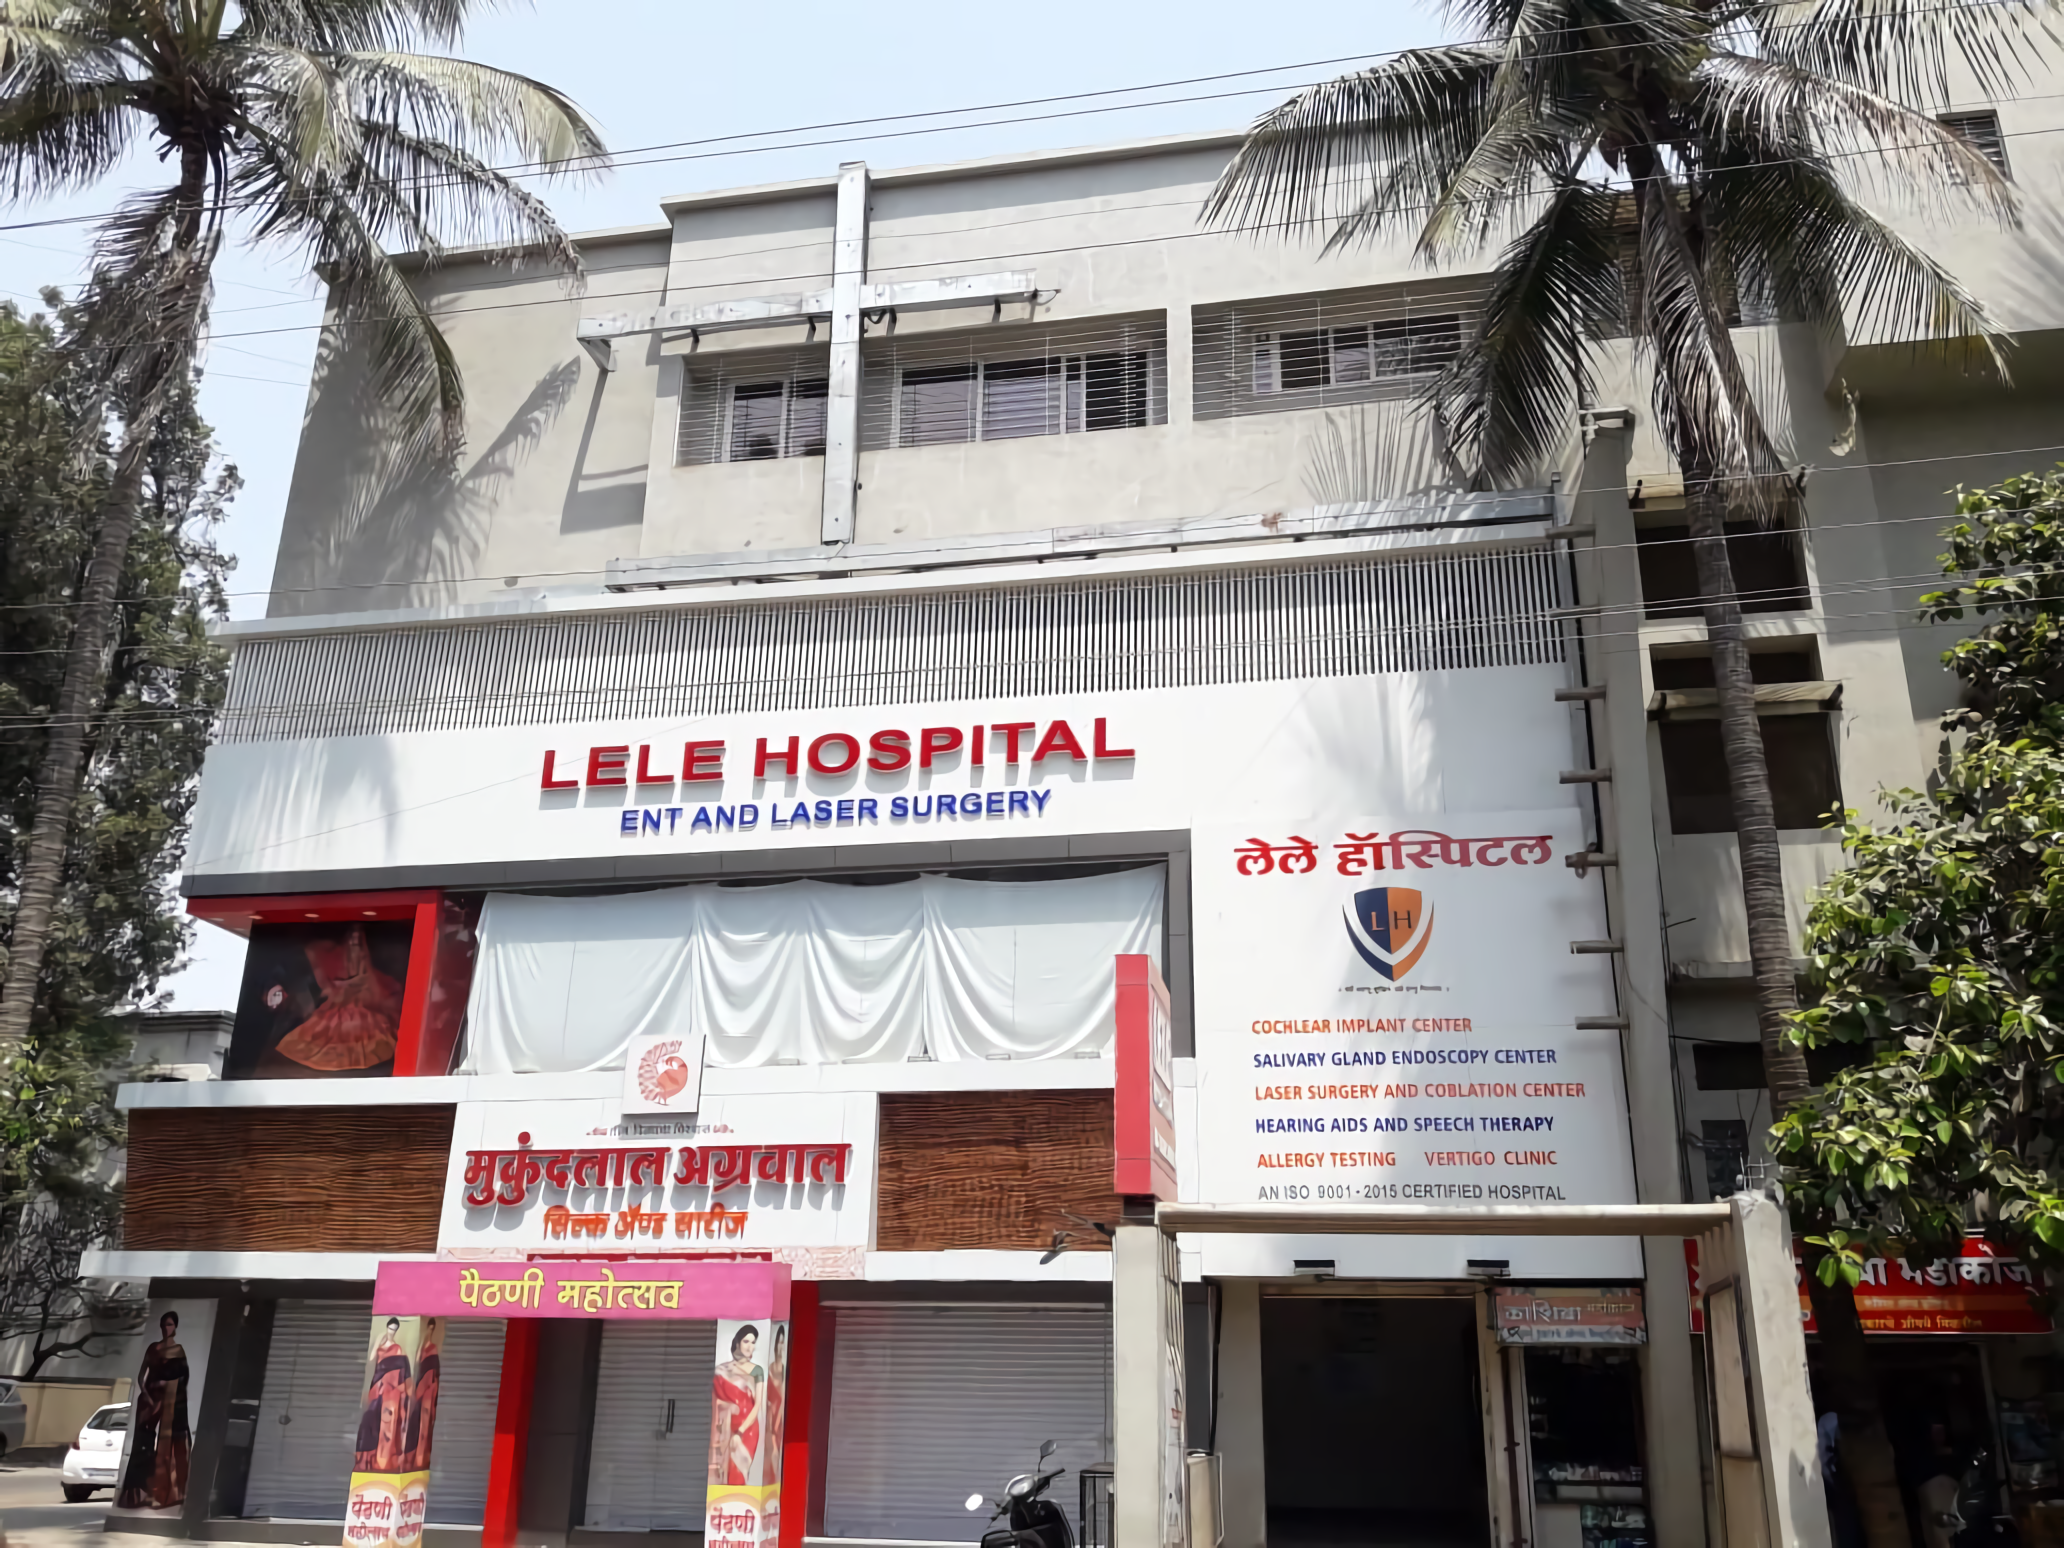 Lele Hospital And Research Centre